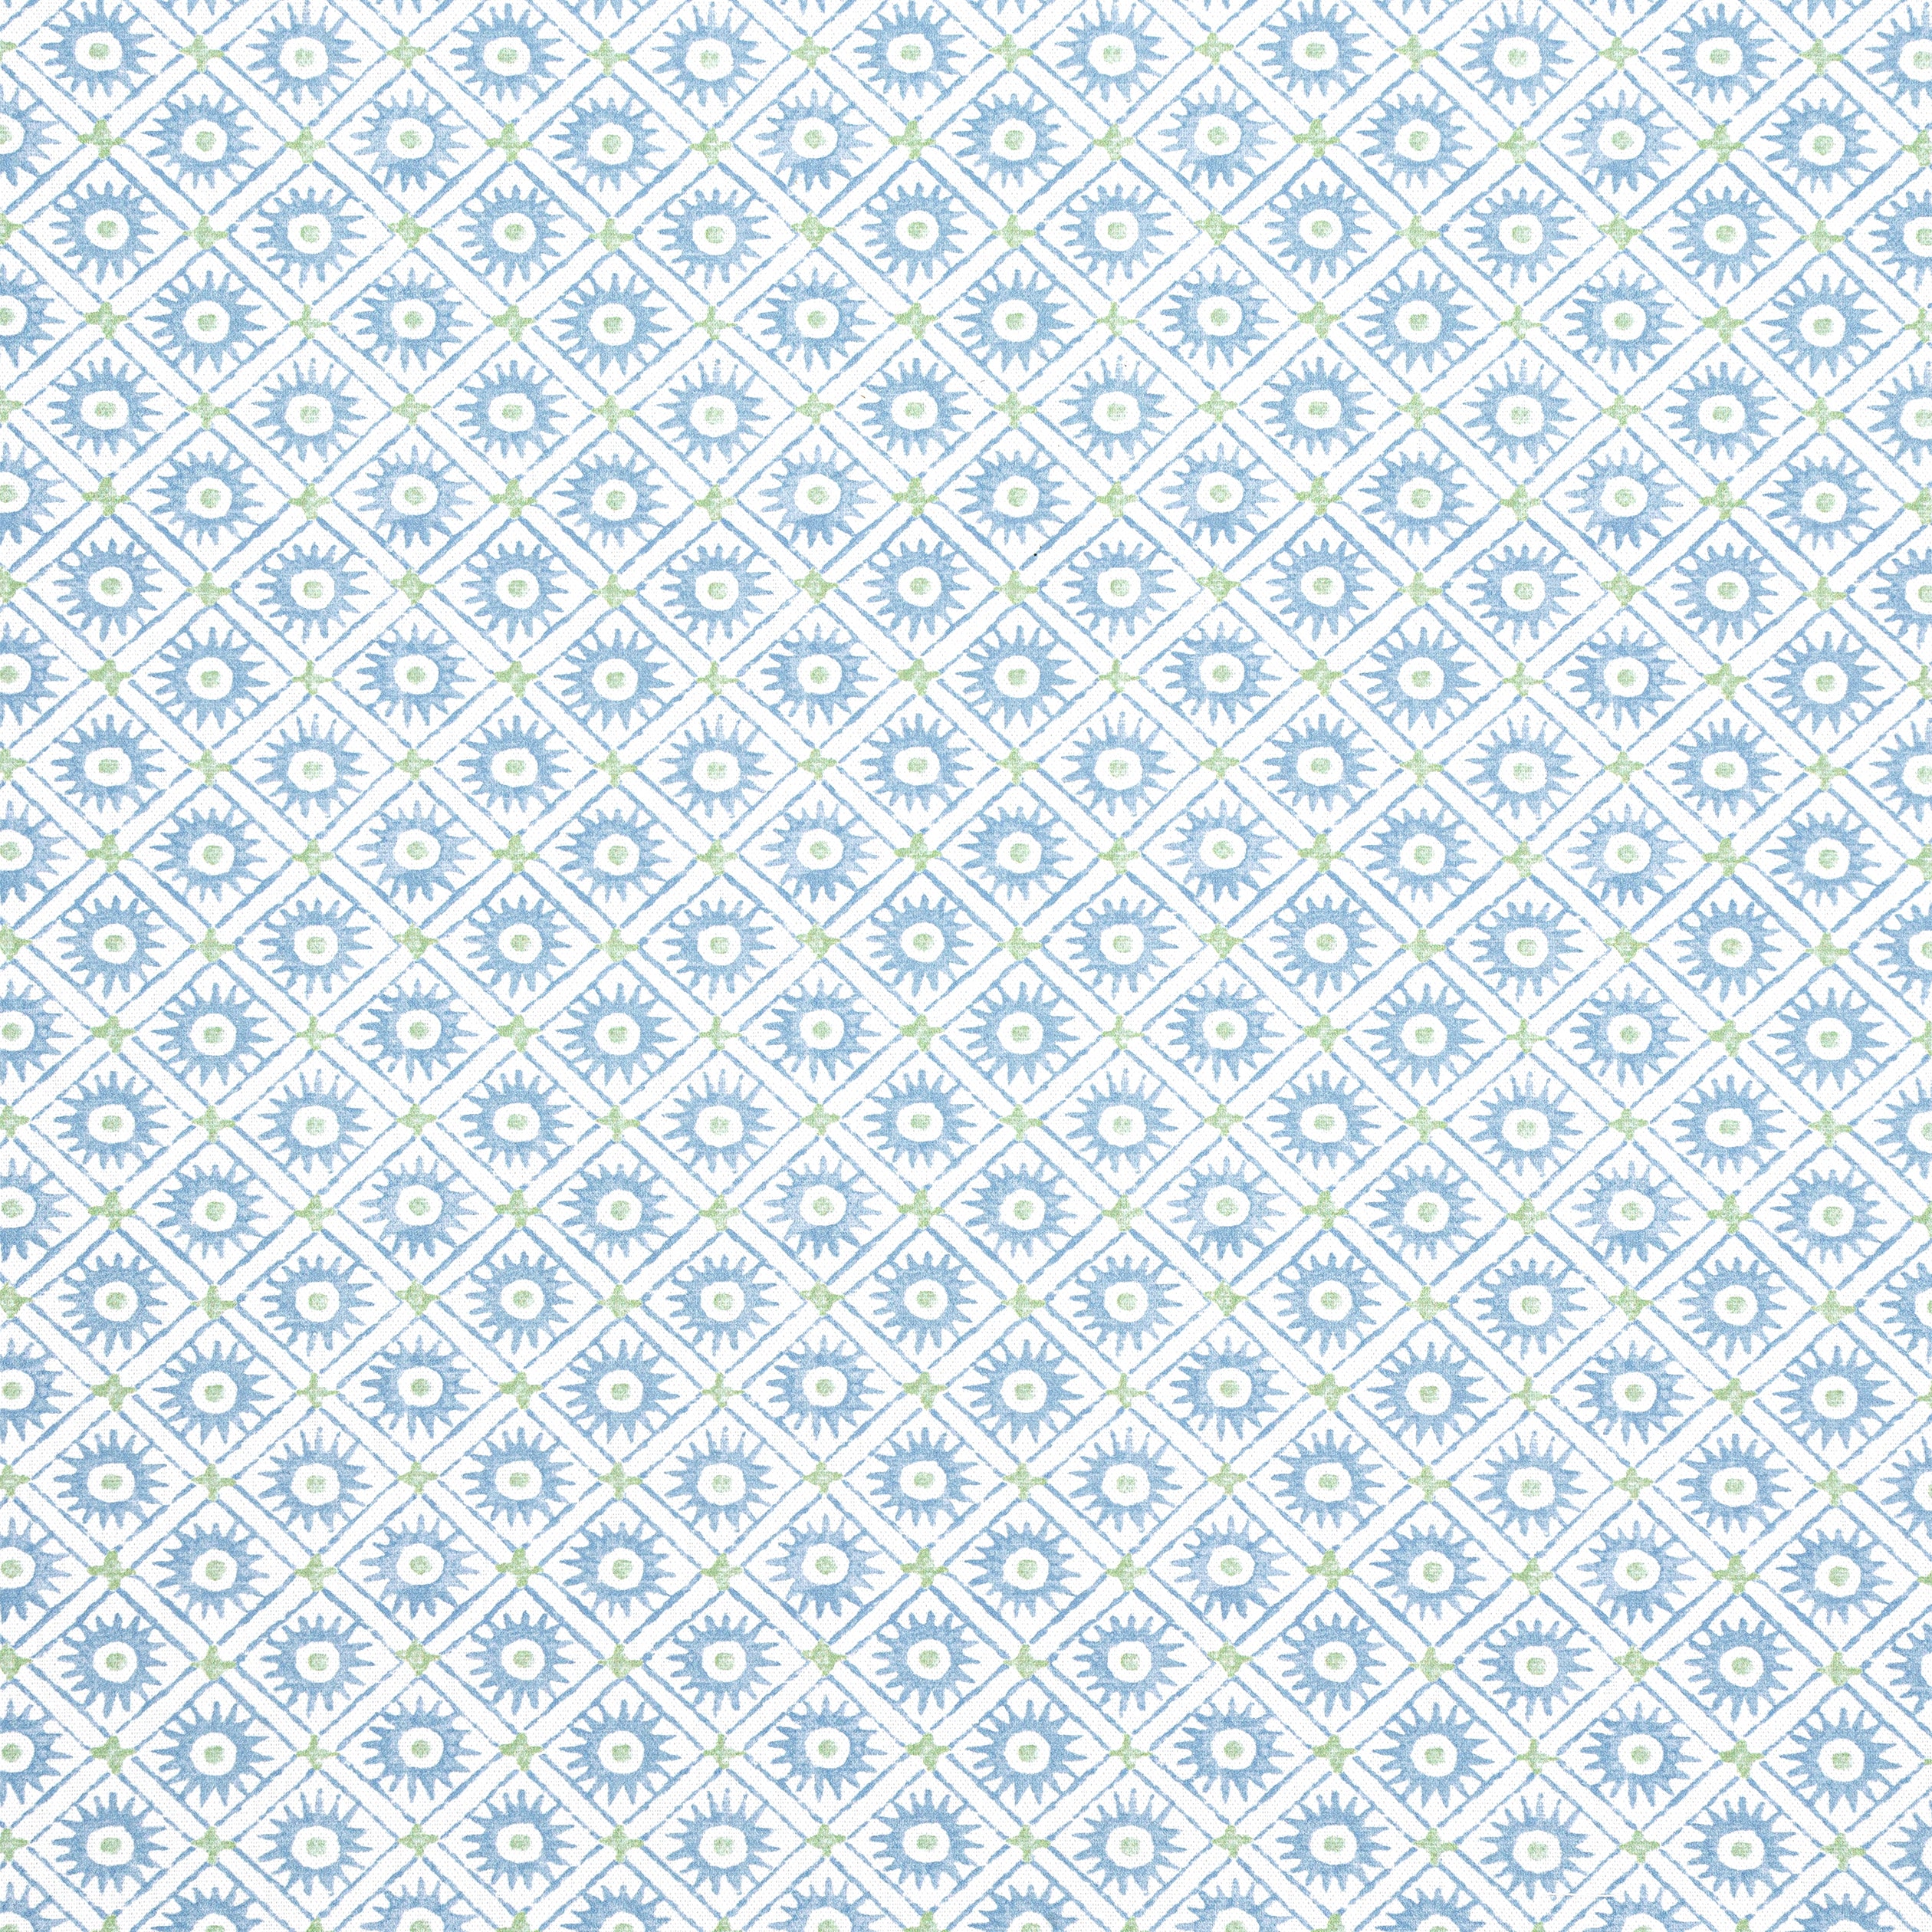 Mini Sun fabric in Sky color - pattern number AF24565 - by Anna French in the Devon collection